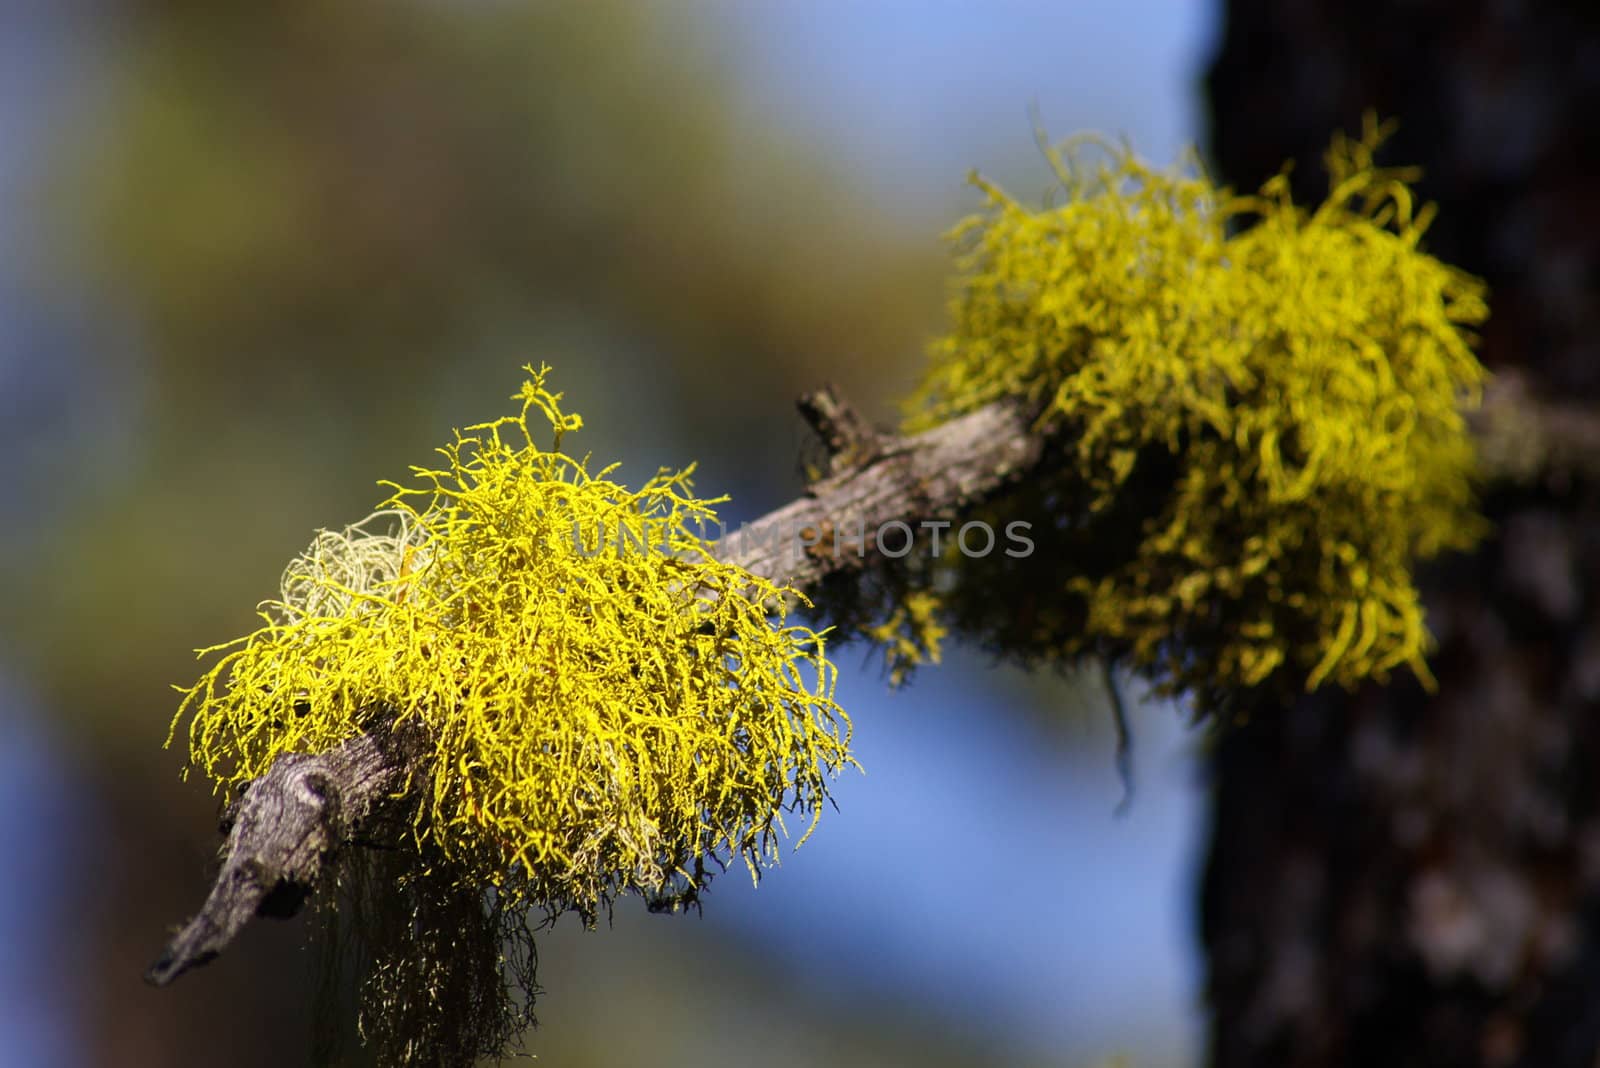 Lichens growing on a tree branch